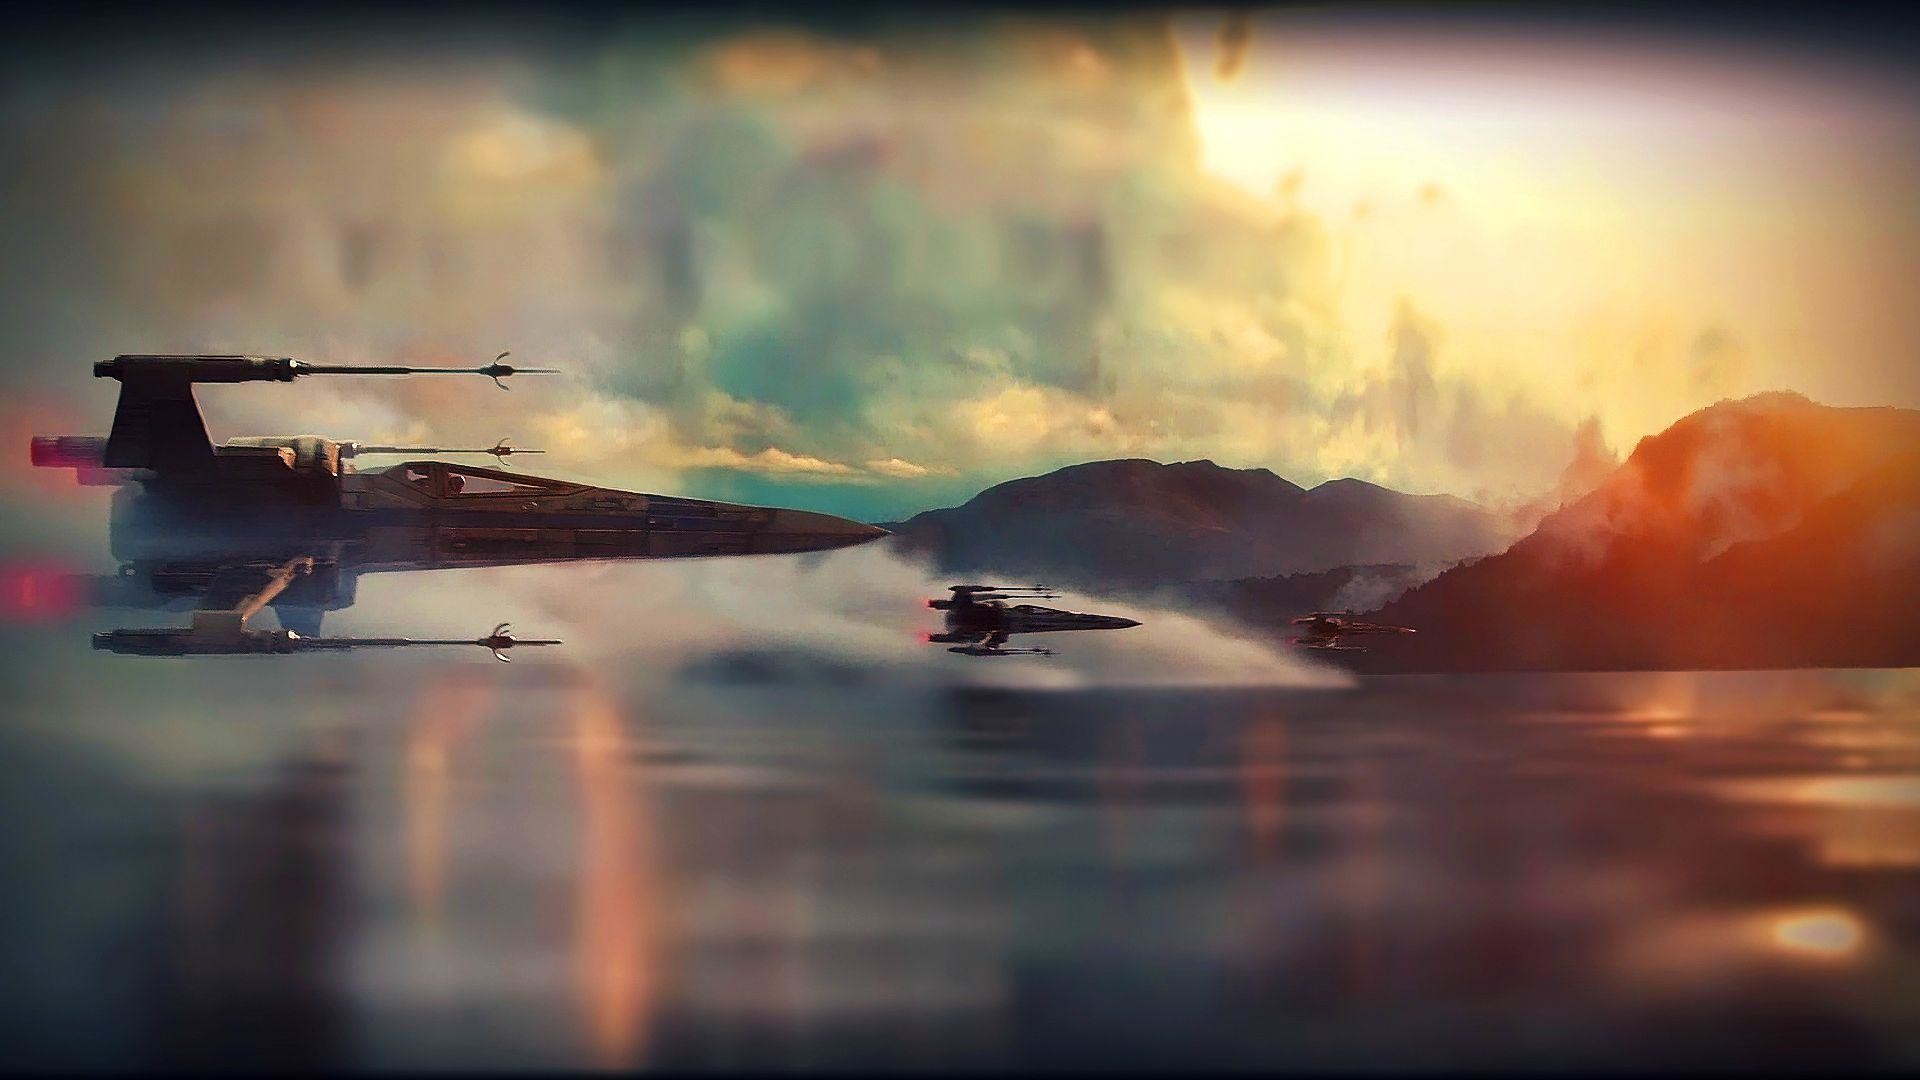 Star Wars Ep VII: The Force Awakens Teaser X-Wing Super Saturated .